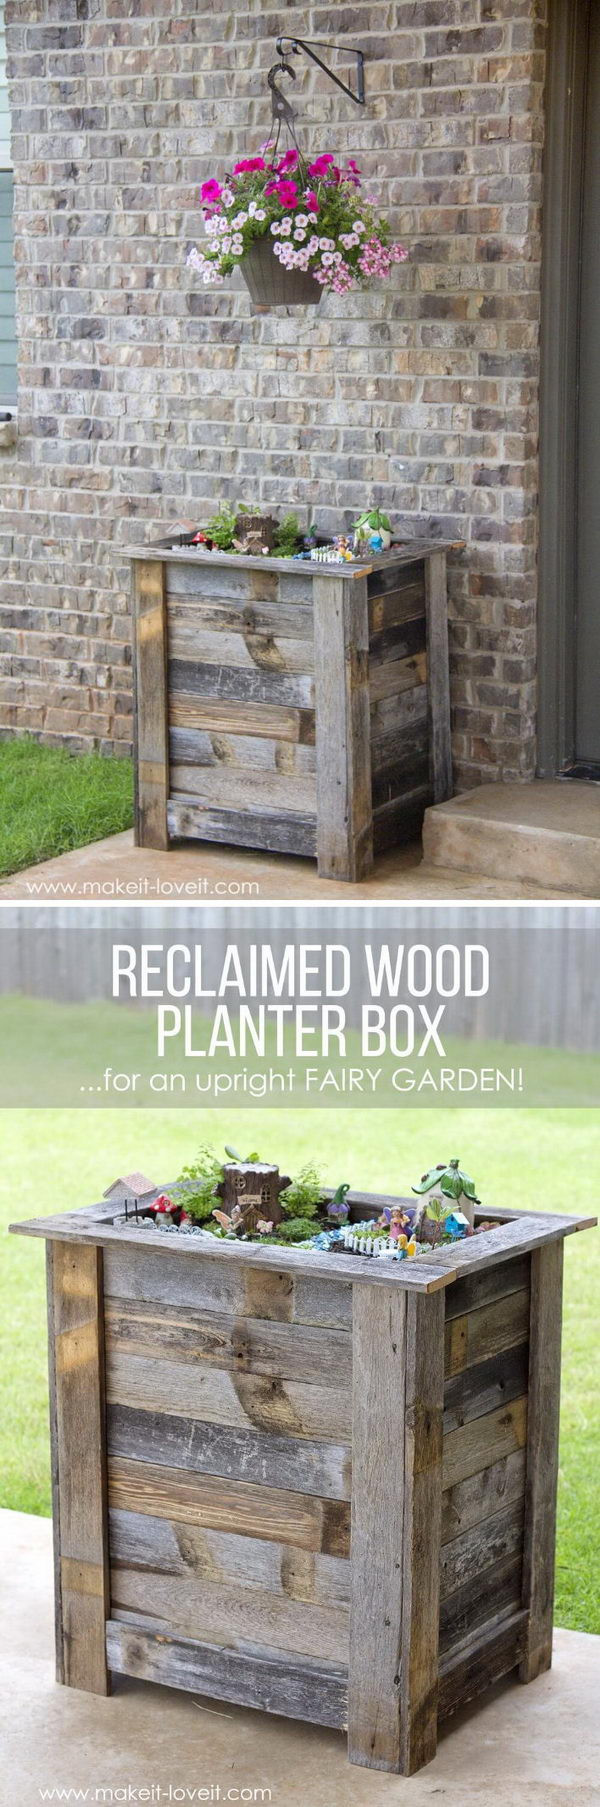 DIY Wooden Planter Boxes
 30 Creative DIY Wood and Pallet Planter Boxes To Style Up